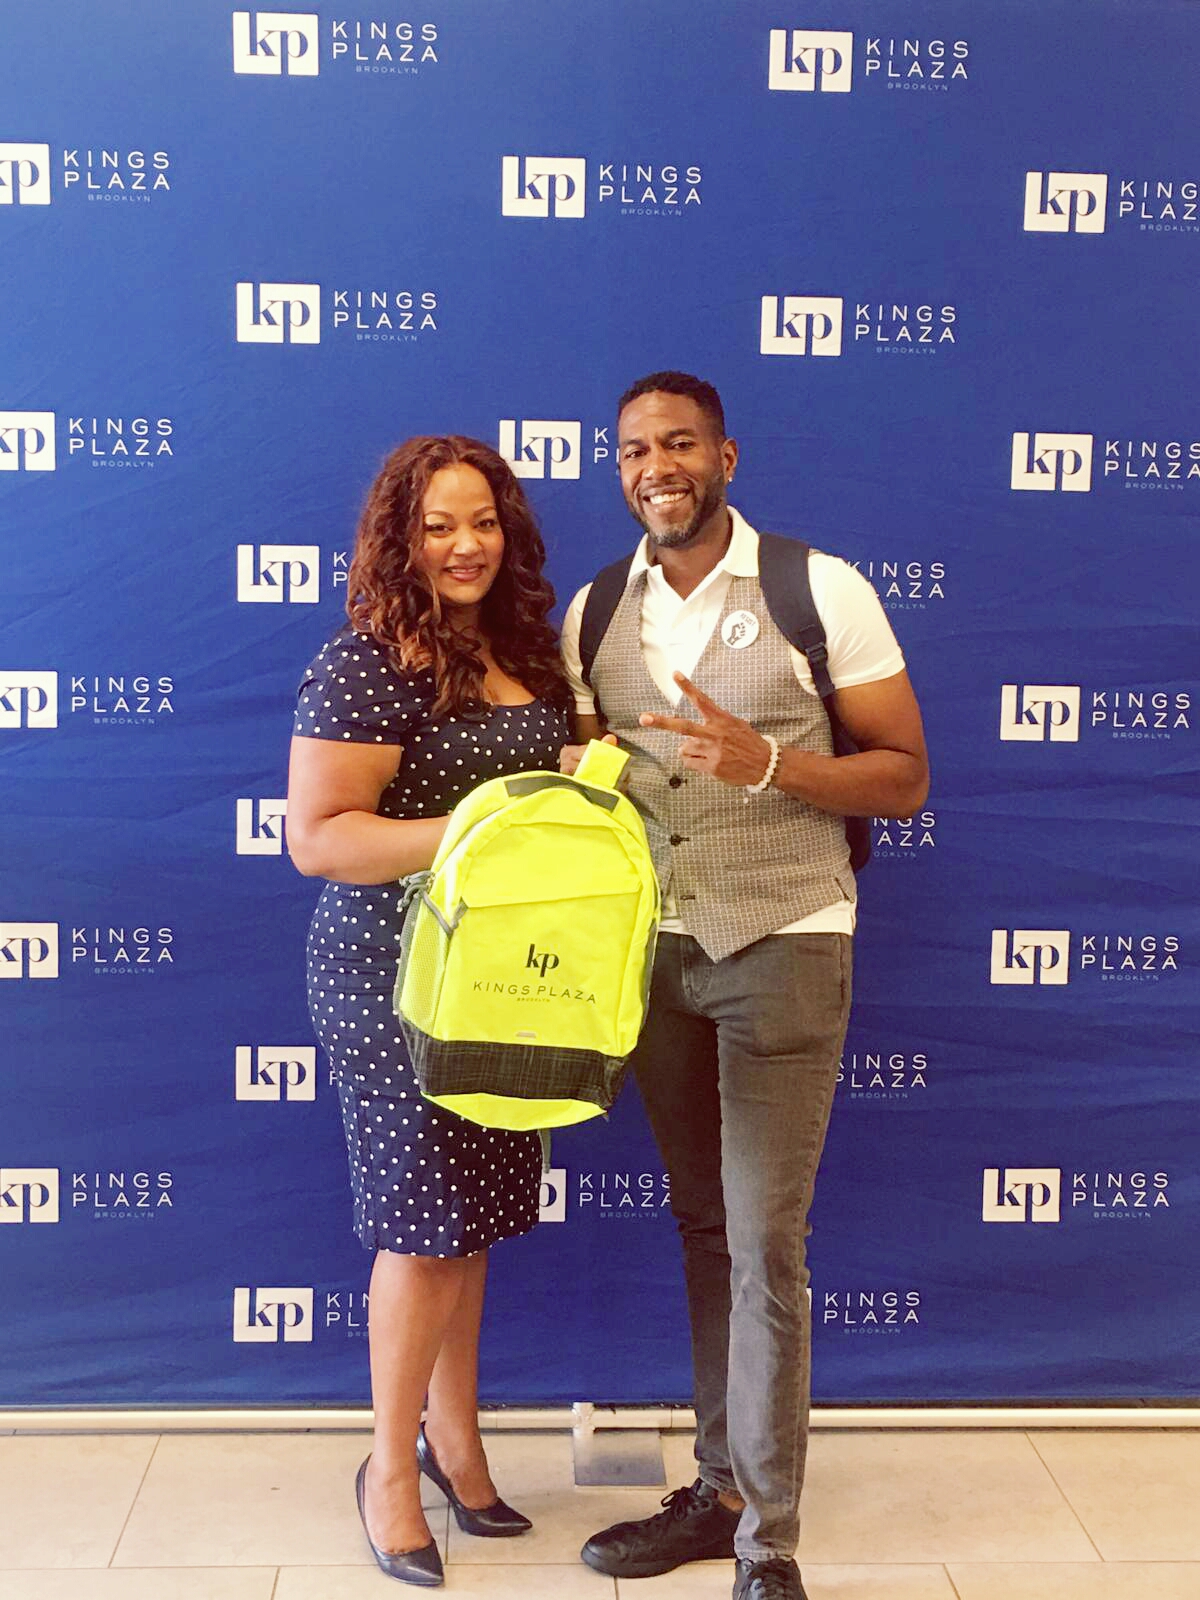 Collecting Backpacks for students at Kings Plaza's Back to School Backpack Giveaway with Public Advocate Jumaane Williams.